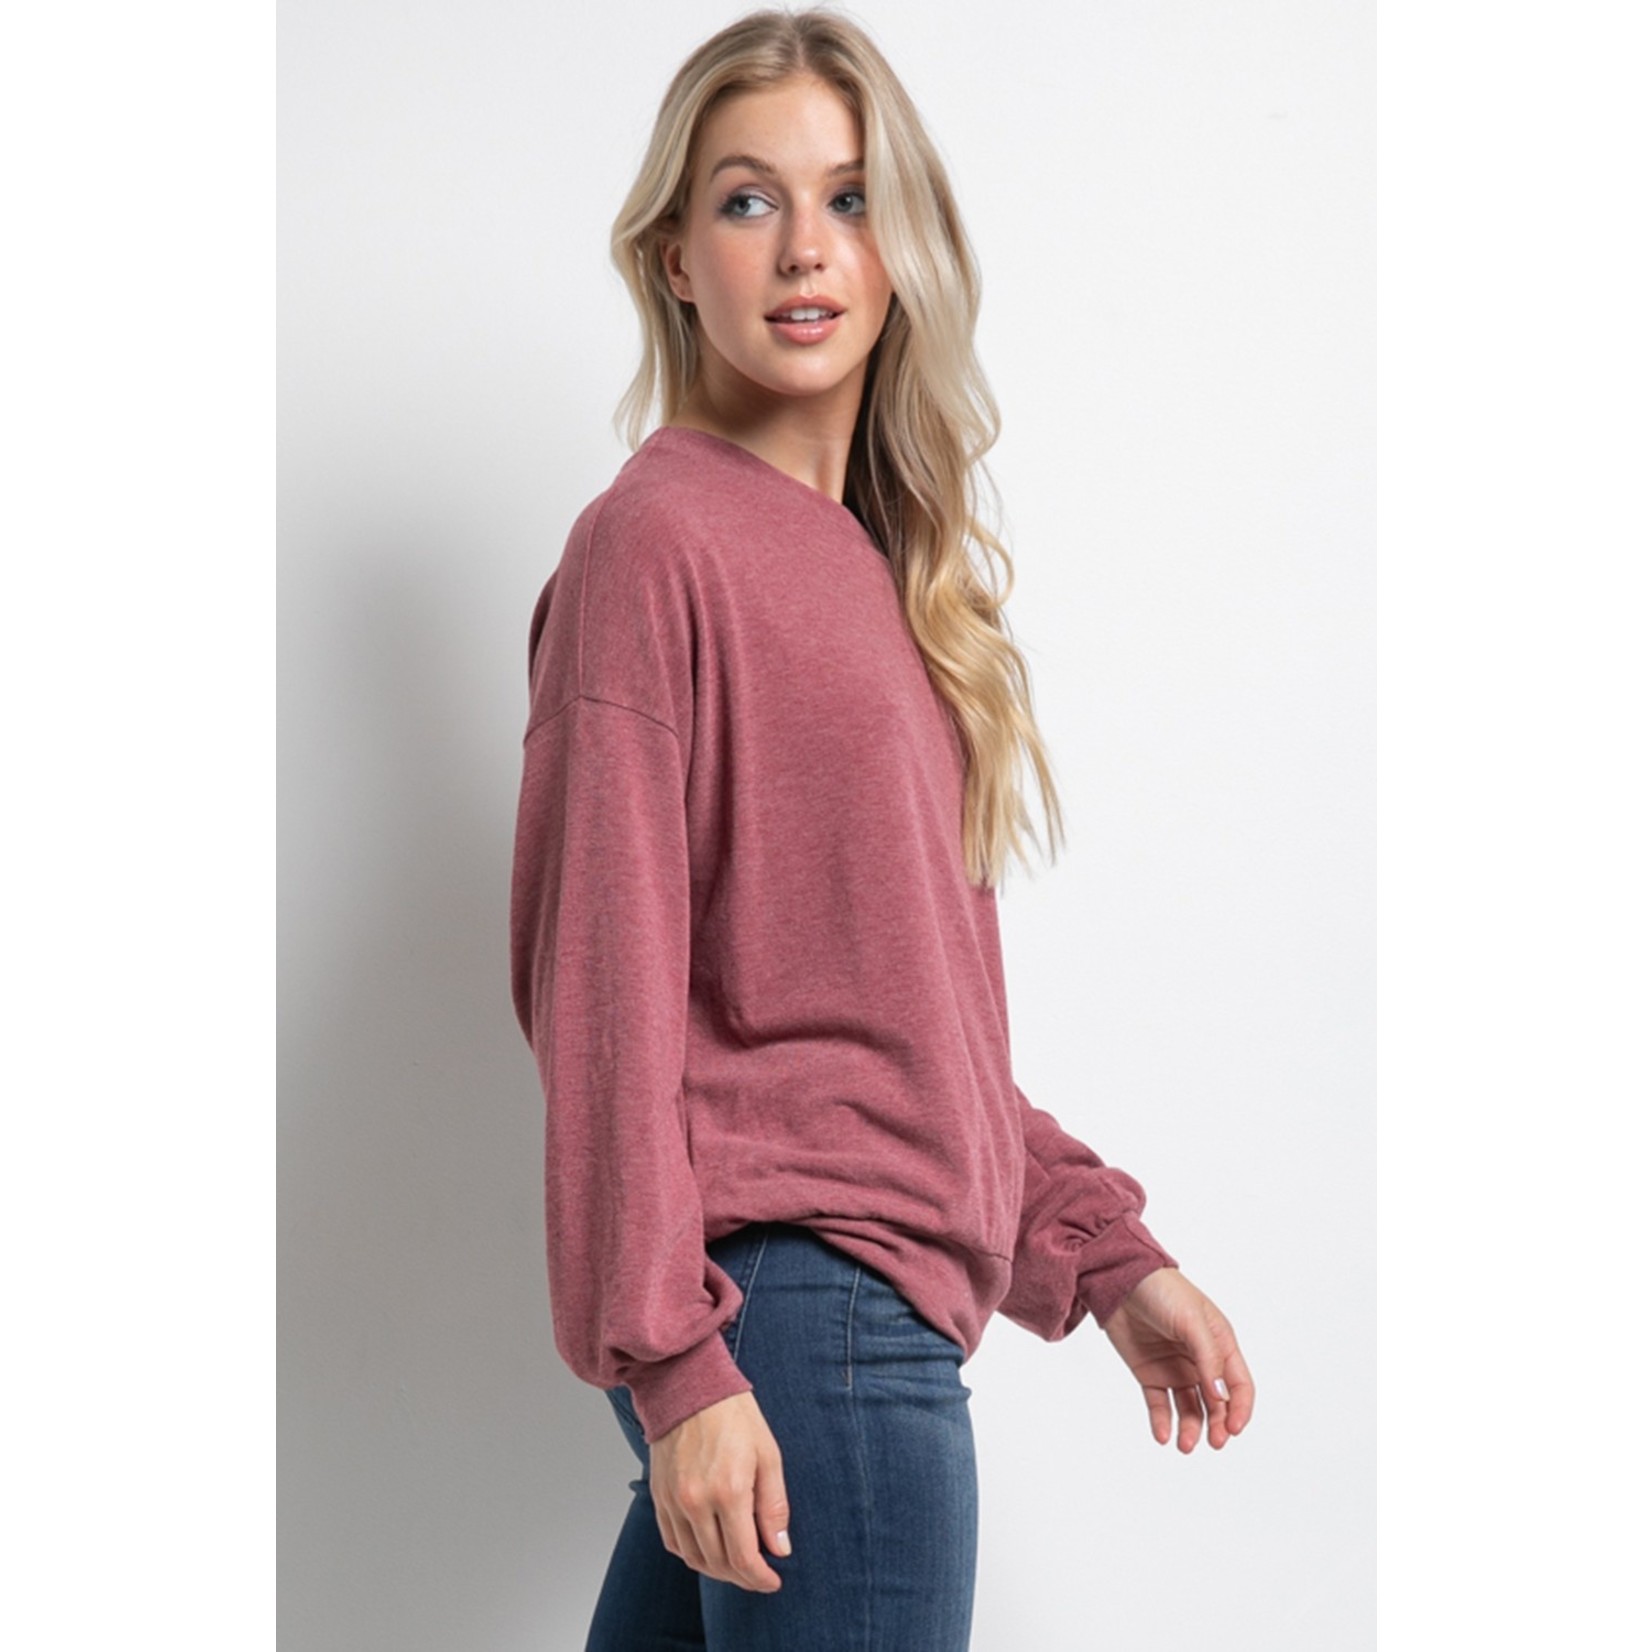 The Phoebe Top